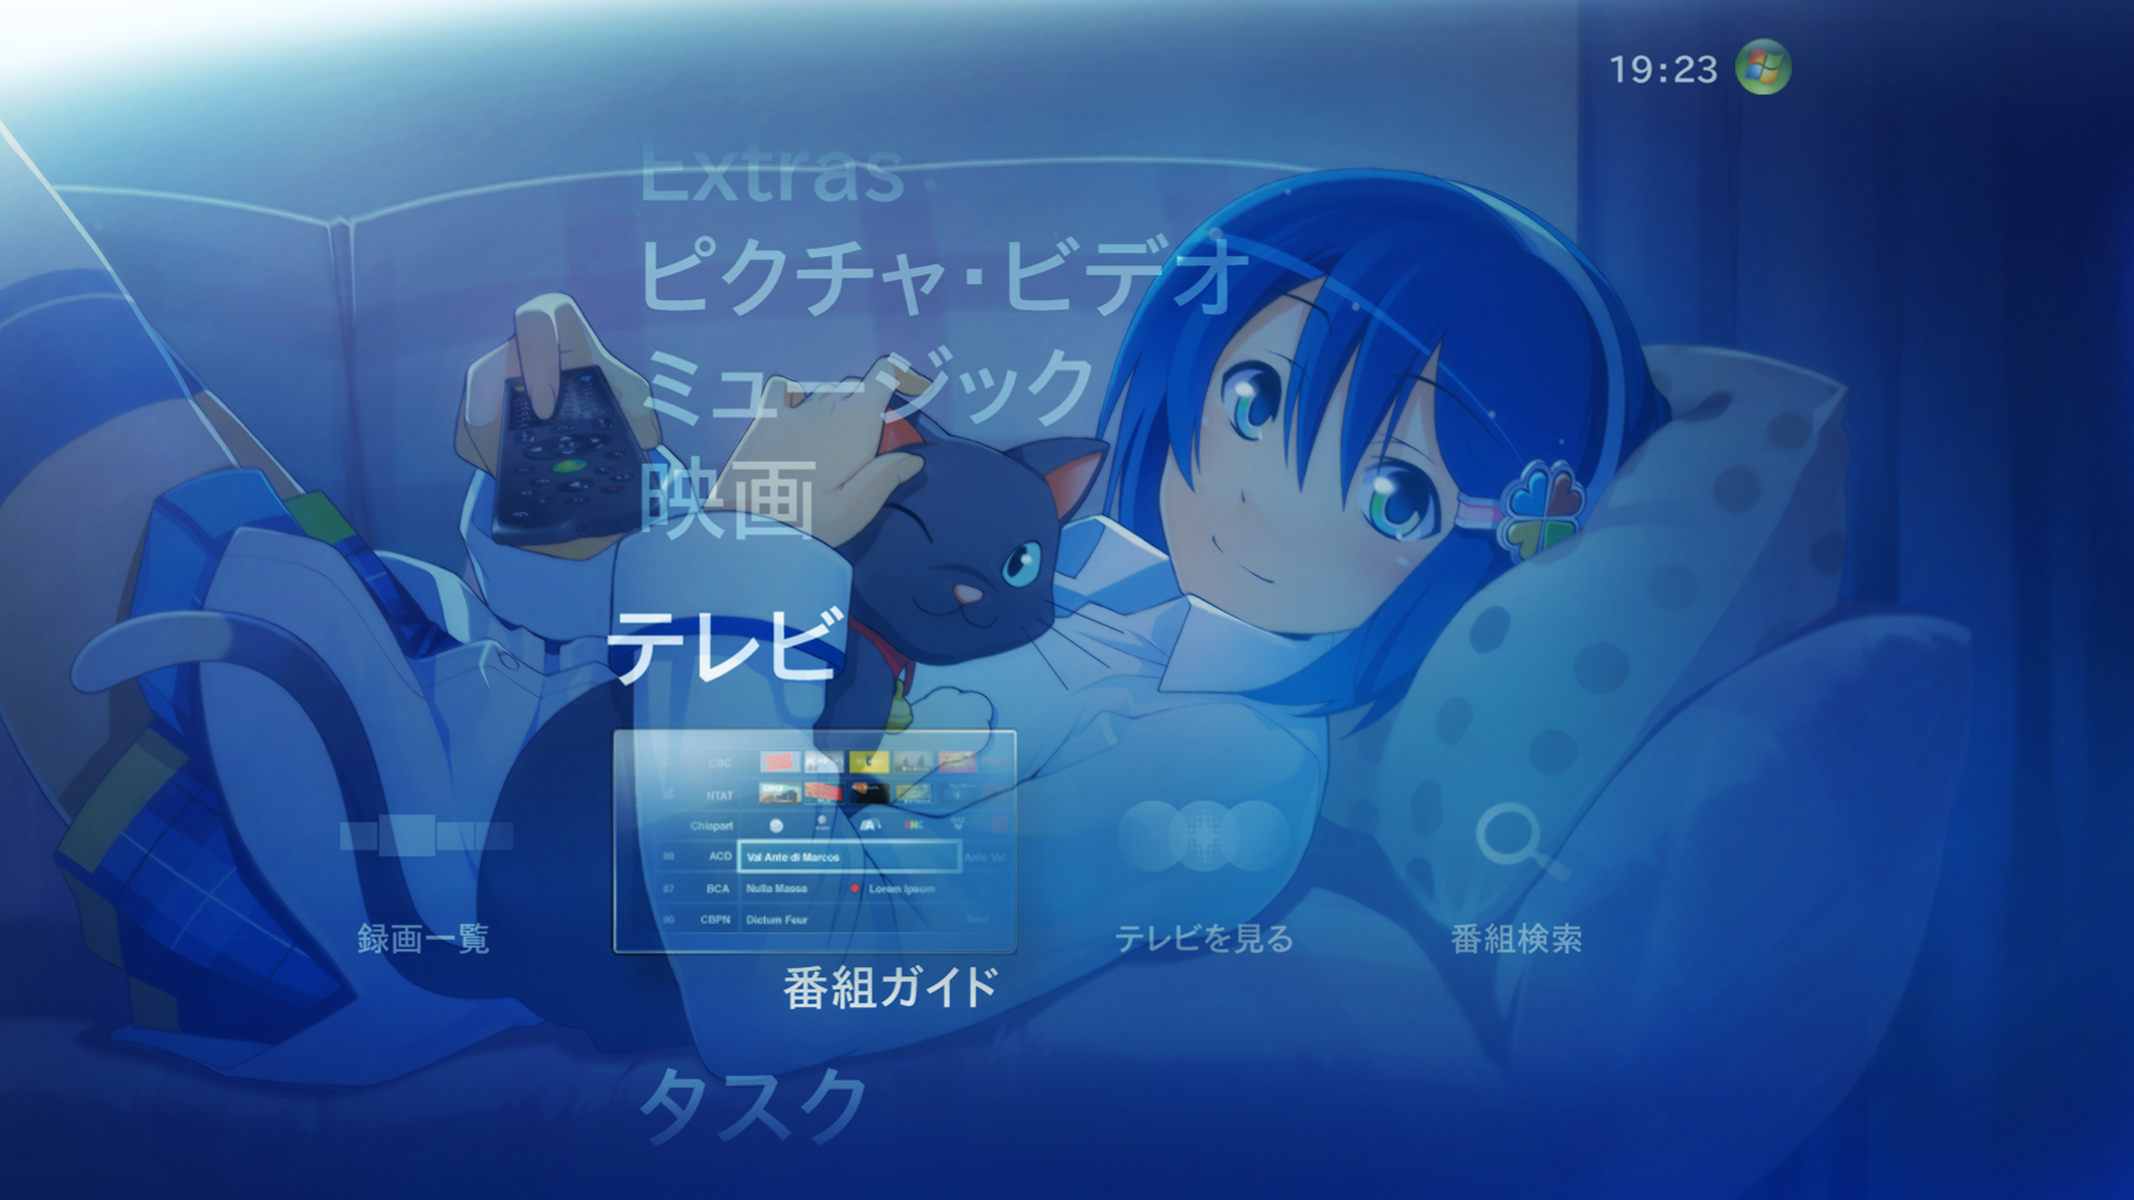 Anime-inspired desktop wallpaper with Os-tan character.